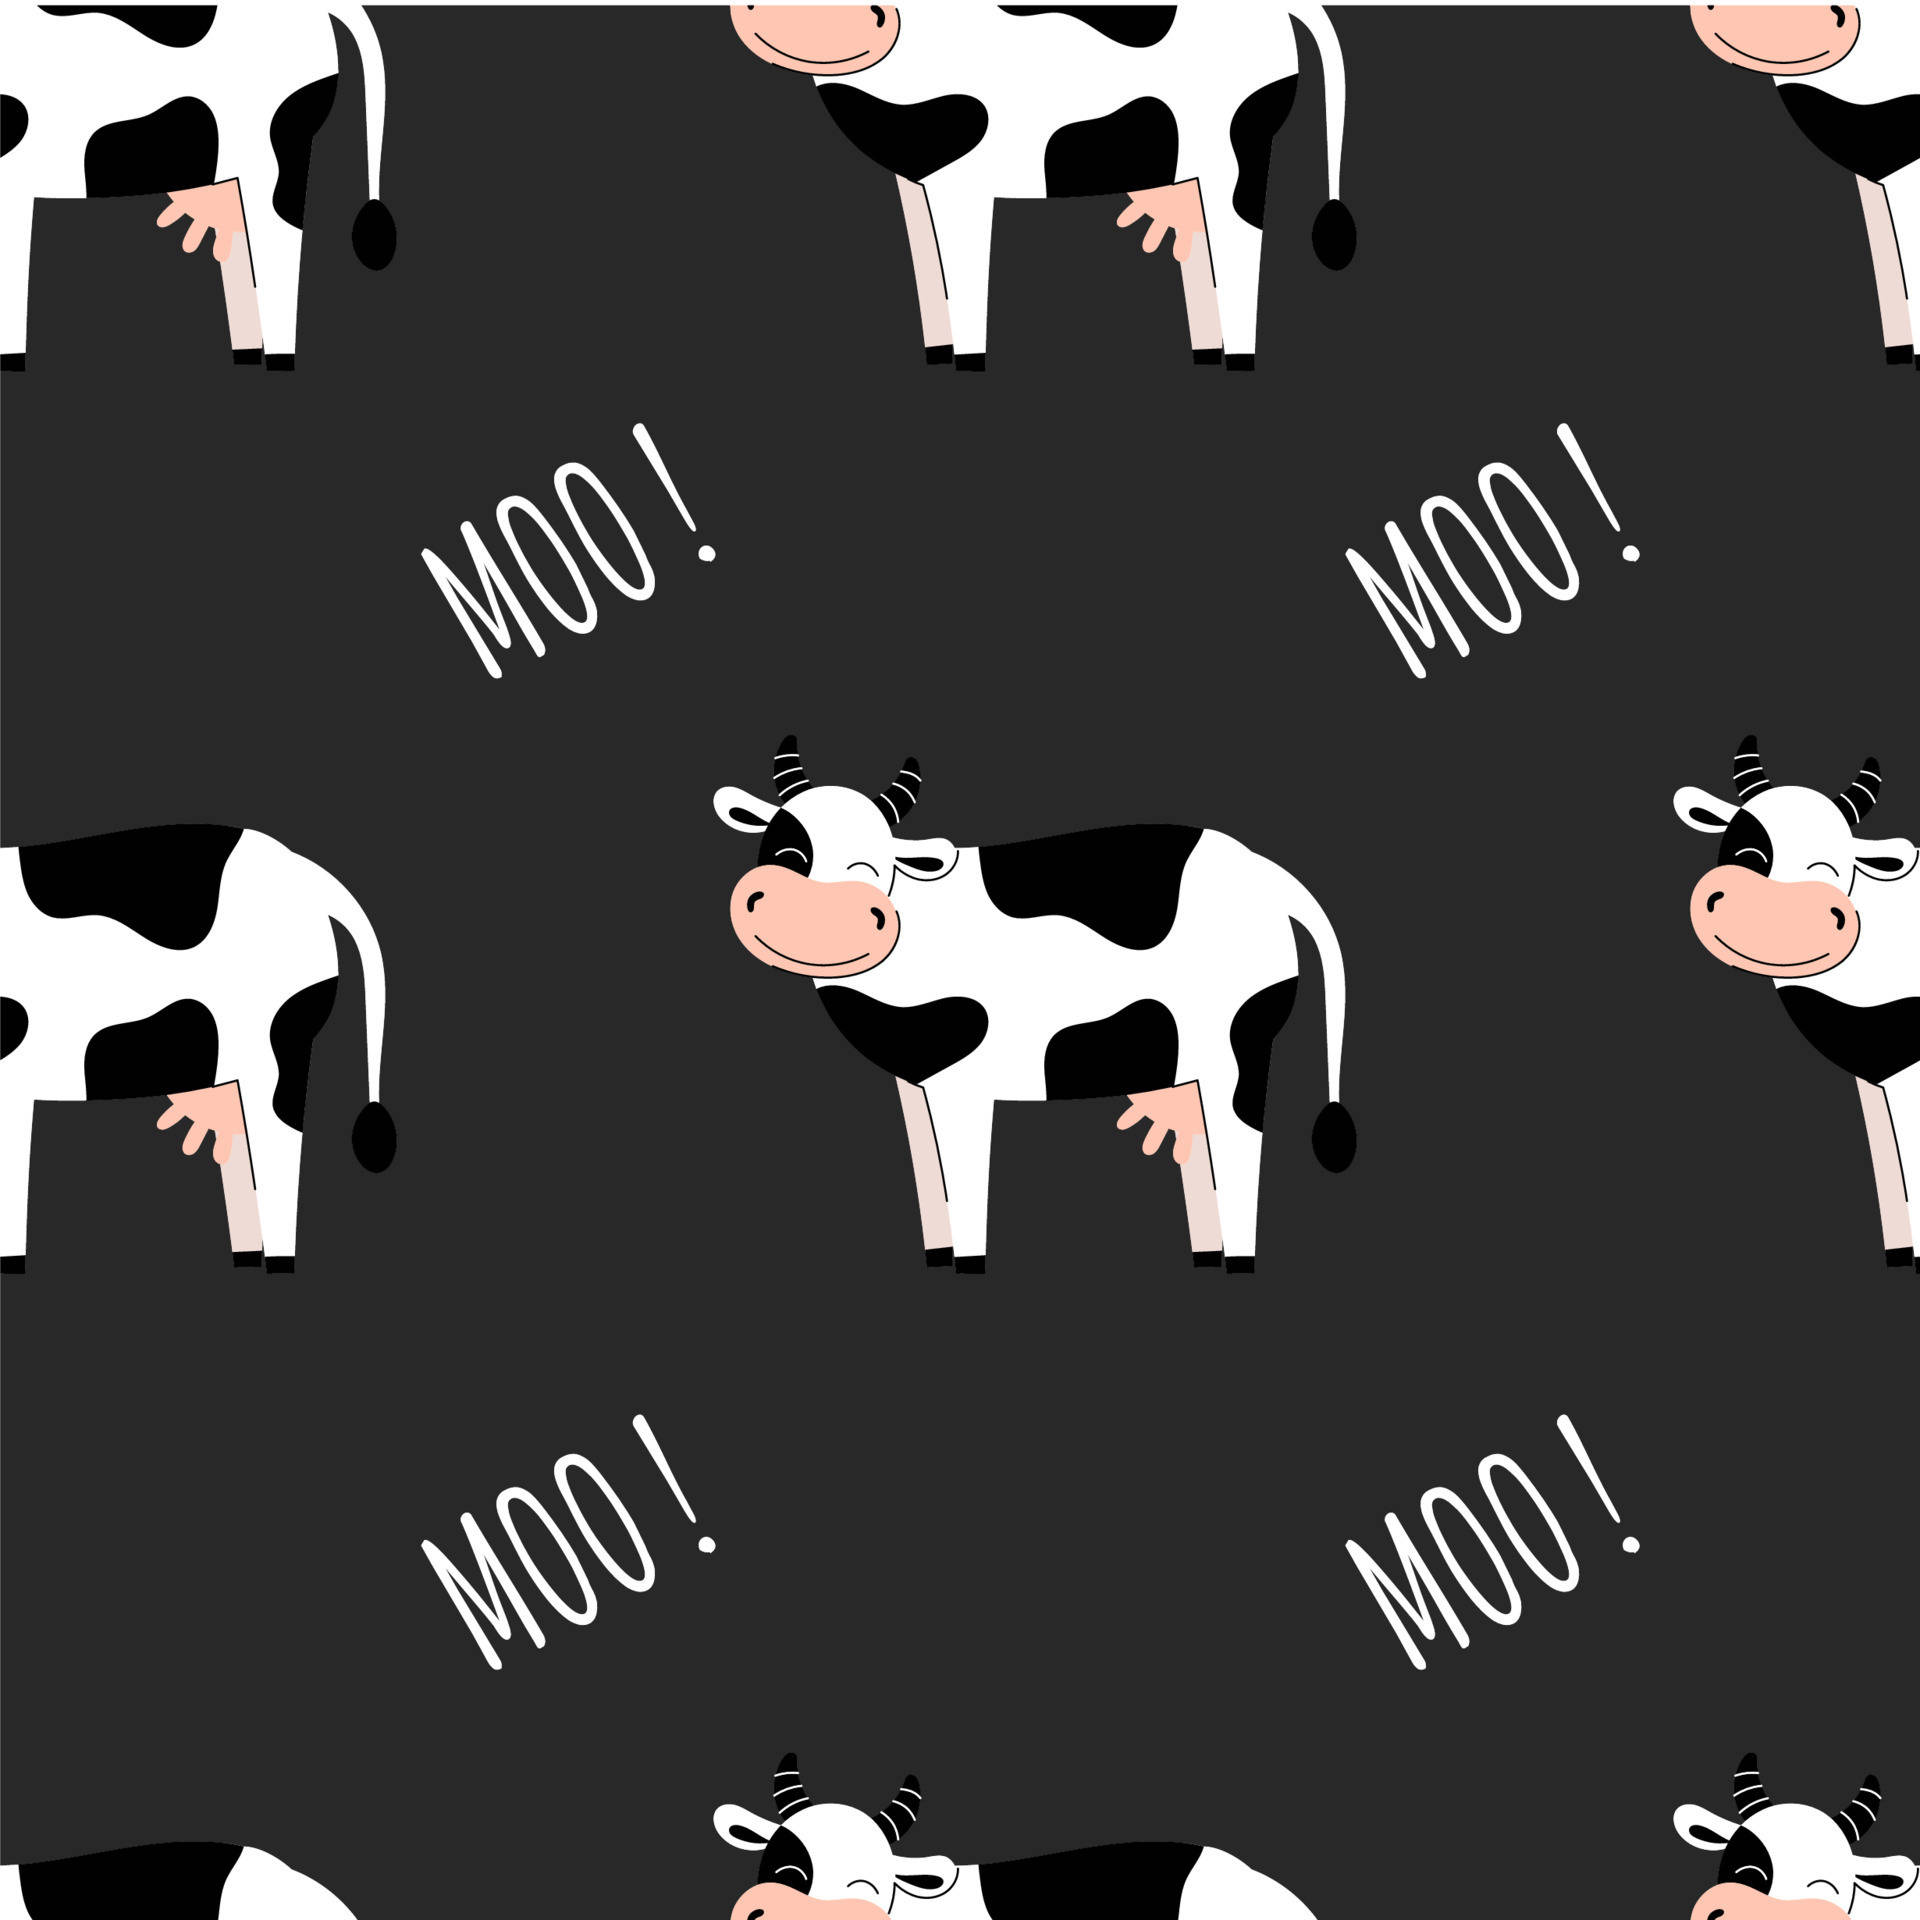 Farm Animal Black And White Cow With The Word "Moo!" Wallpaper